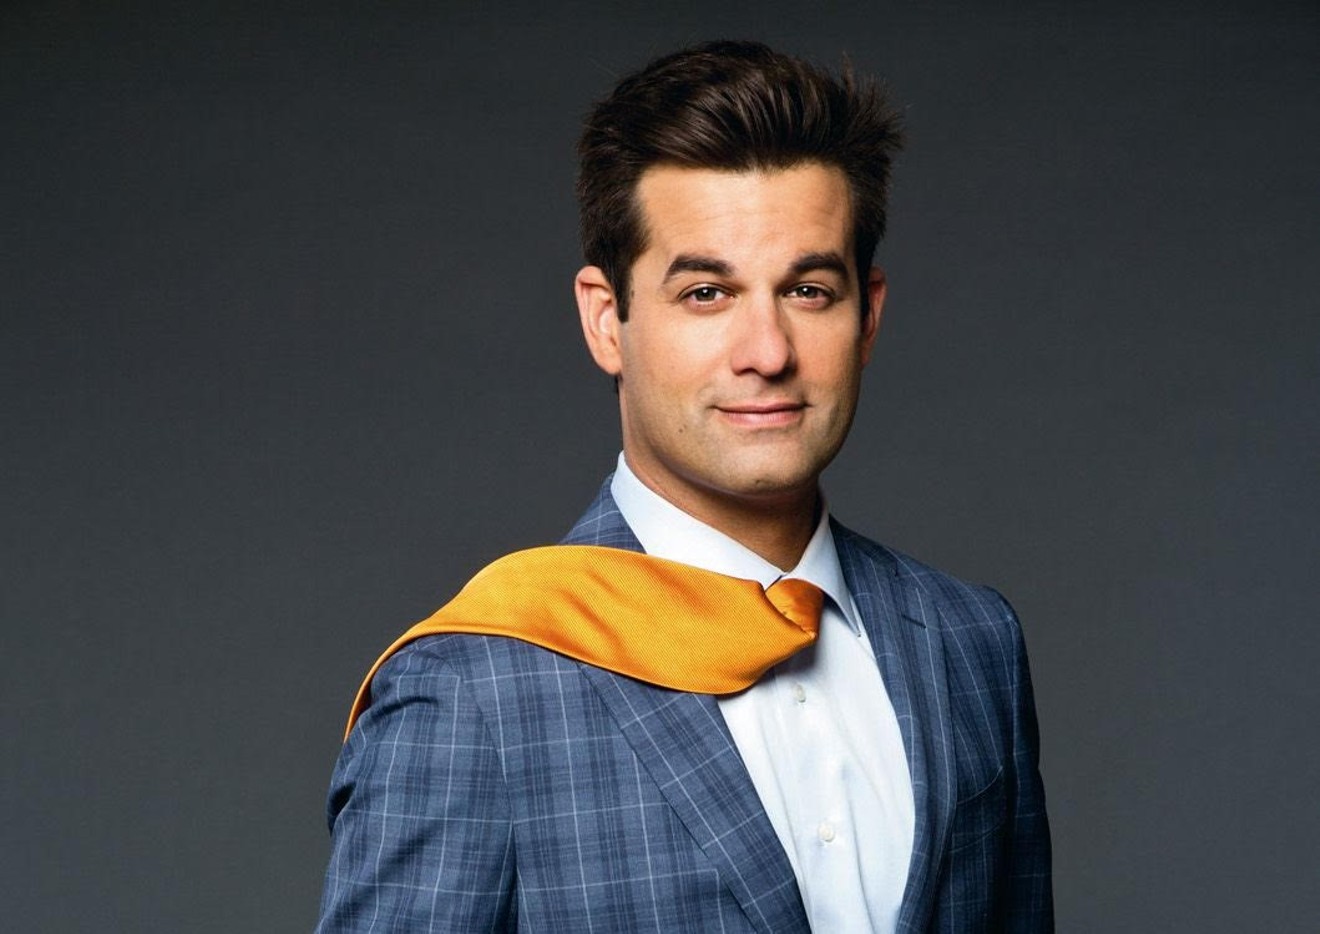 Daily Show correspondent and comedian Michael Kosta will perform his new one-hour show at the Dallas Comedy Club on Friday, Nov. 12 and Saturday, Nov. 13.